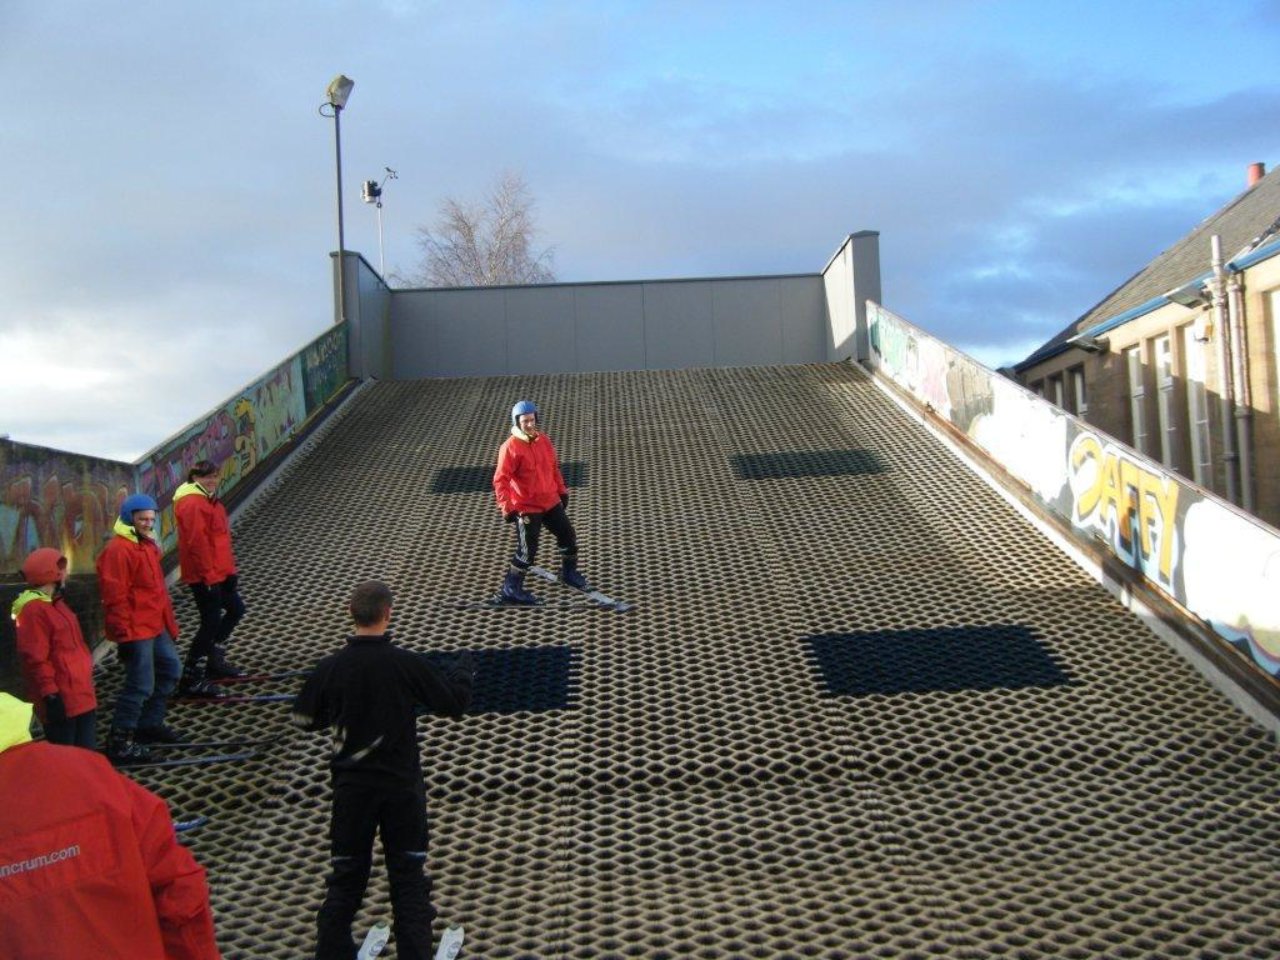 CAIR Scotland service users on a dry ski slope